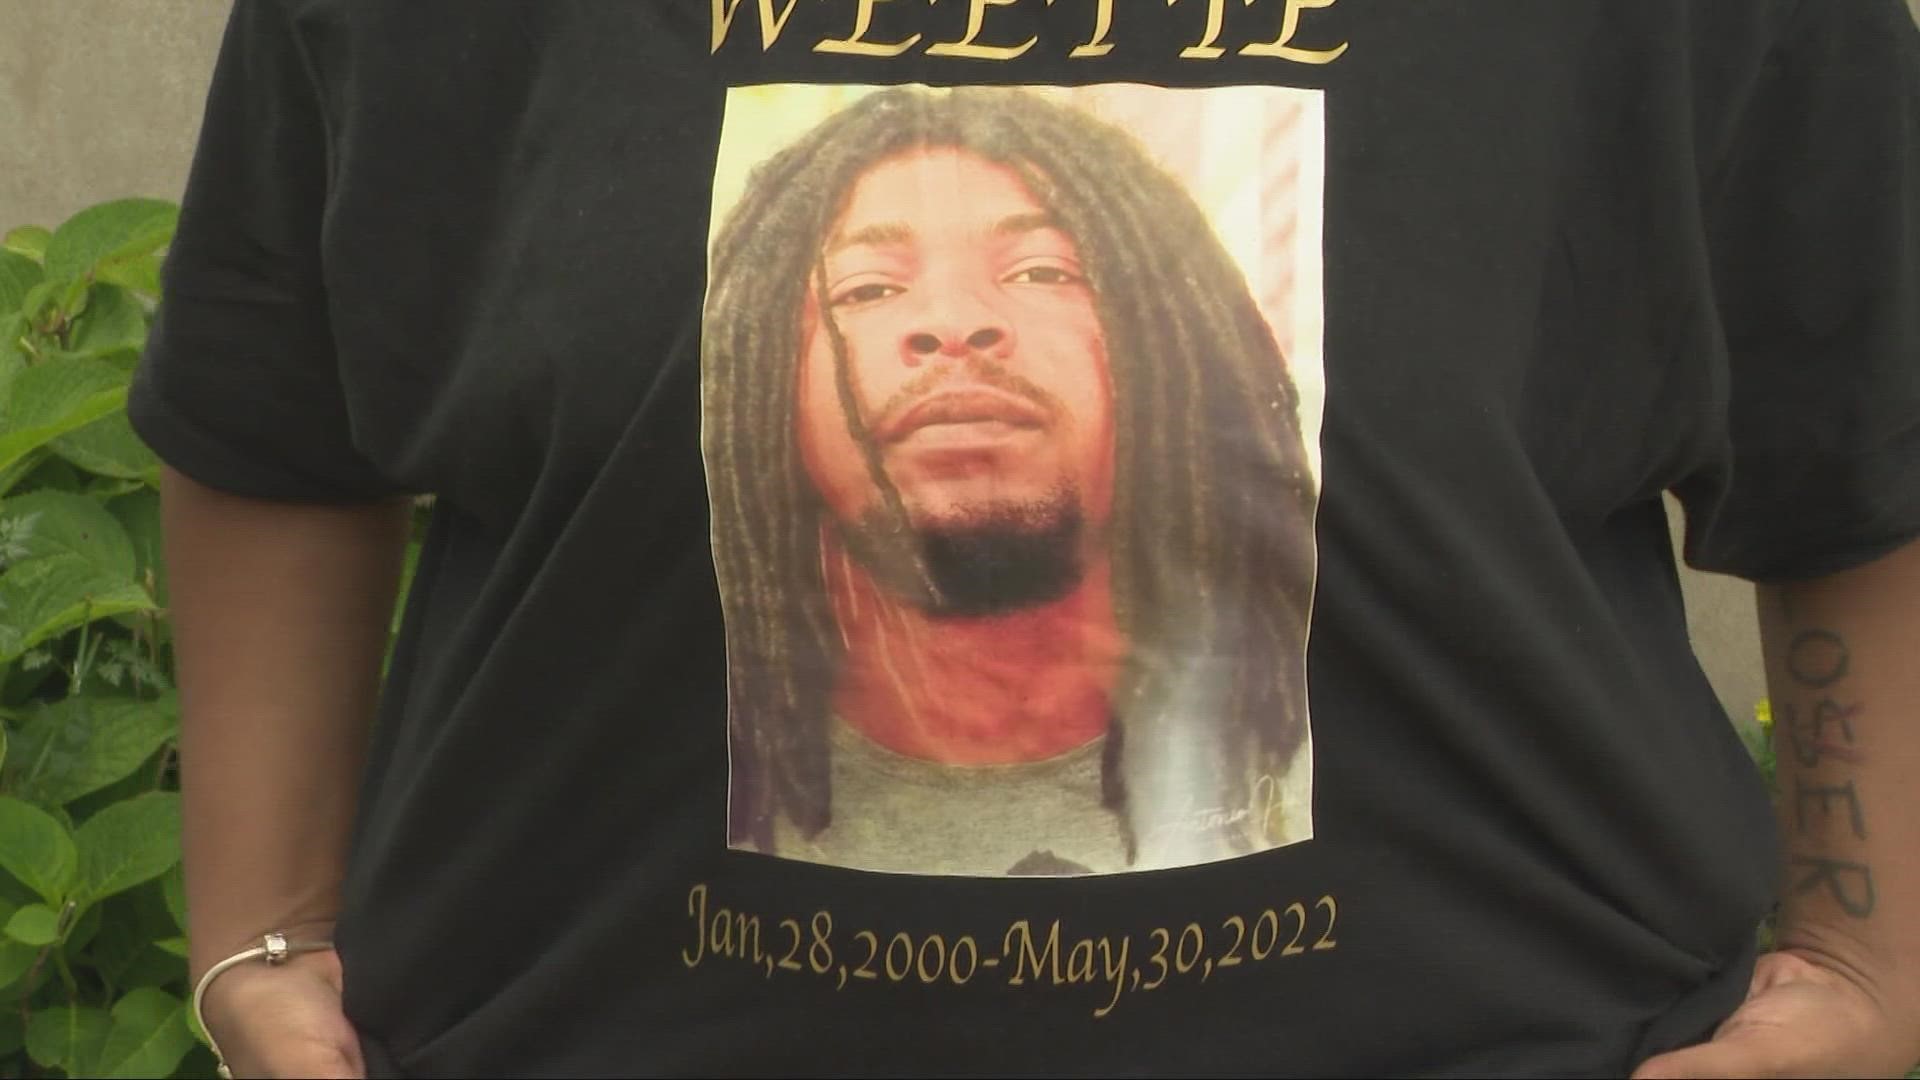 The family of Datwuan Catchings has released extended body cam footage of the 22-year-old's fatal shooting at the hands of Maple Heights Police.